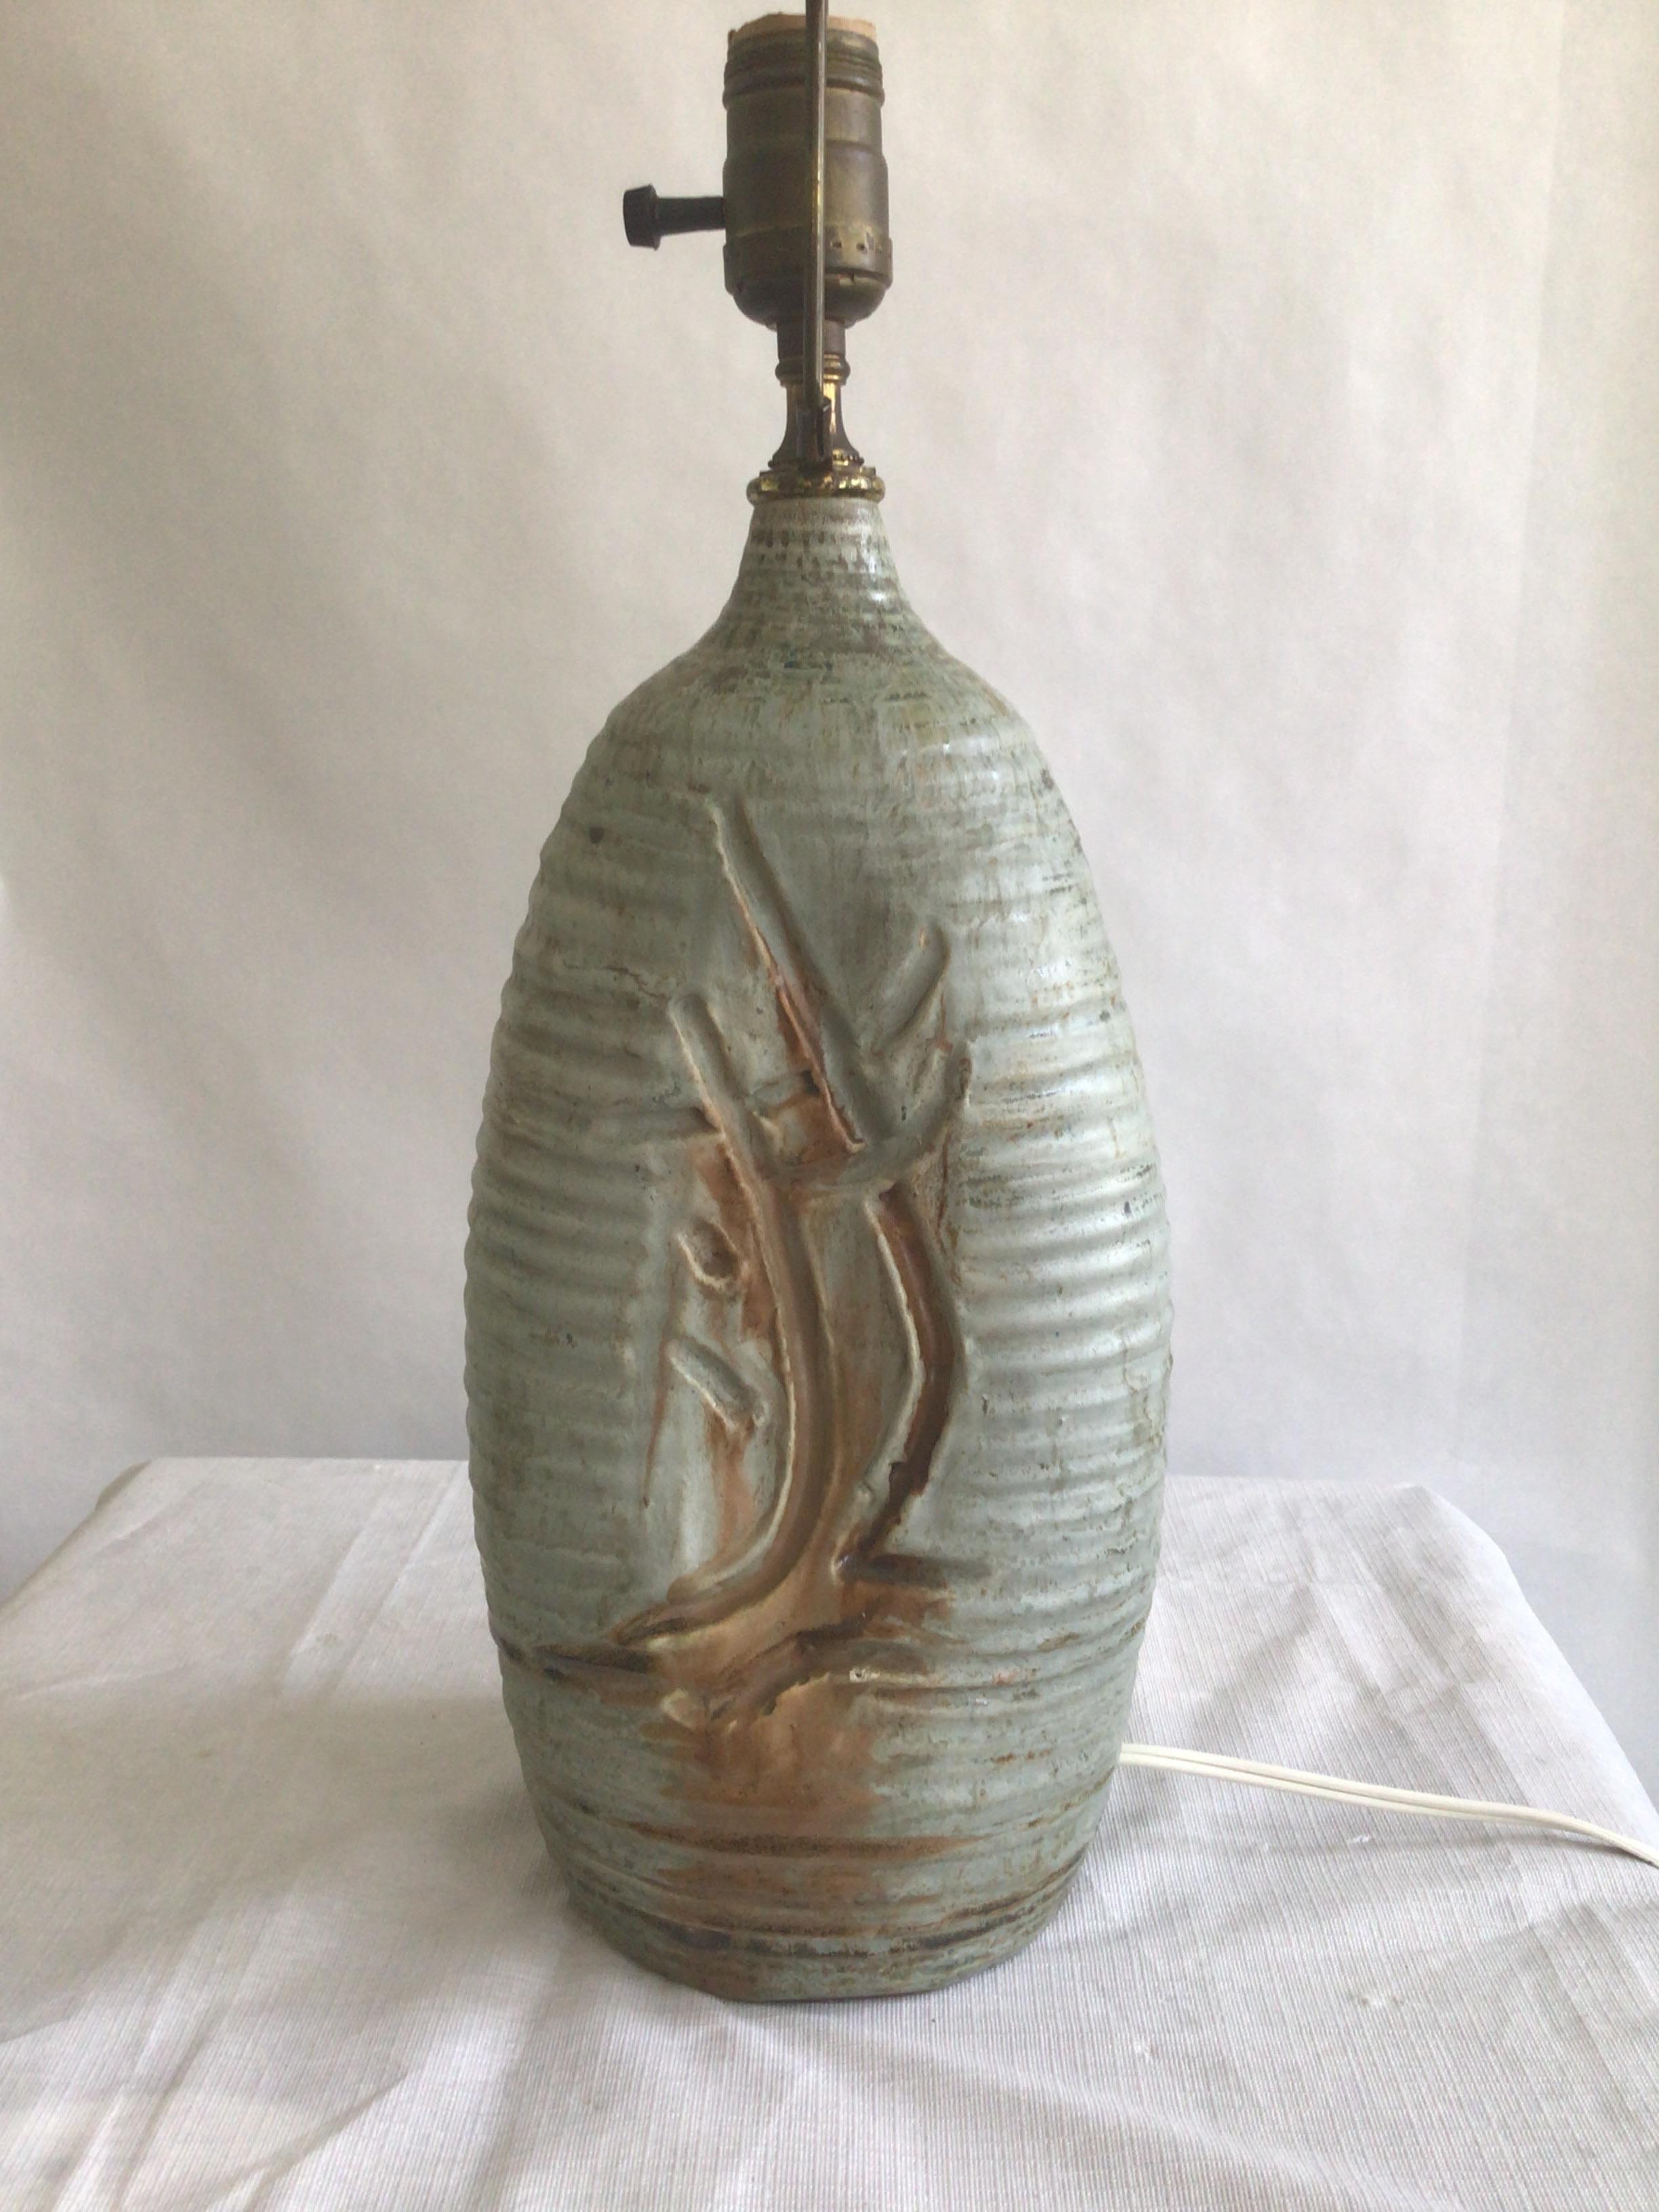 This 1960 Table Lamp with Hand Carved Wheat Motif in an ovoid shape has a cylindrical neck resembling that of a bottle
The lamp is finished in neutral beige hues with carved decoration executed in a deeper shade of brown or rust
Height to top of